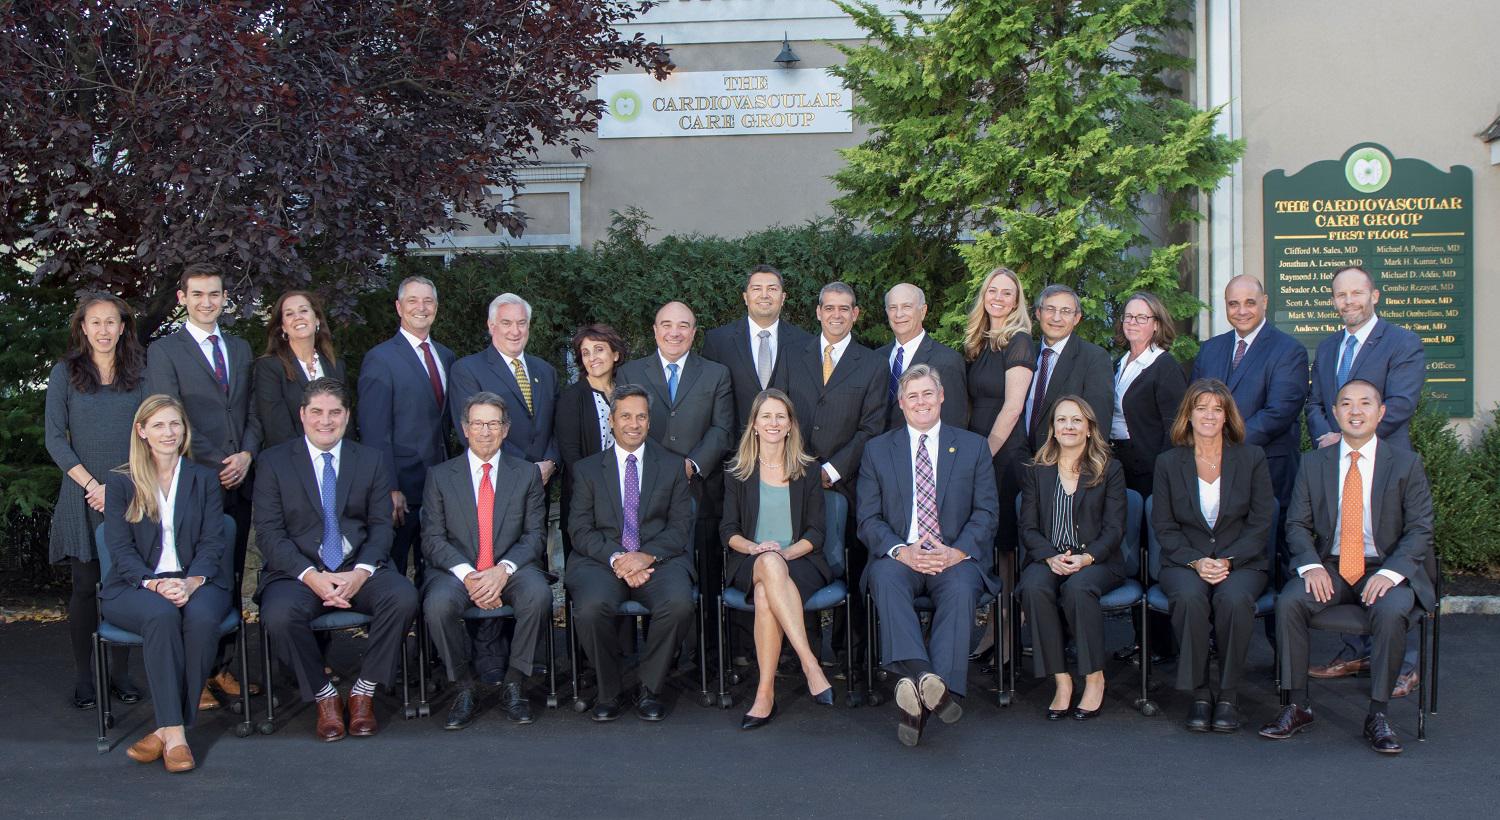 Vein Institute at The Cardiovascular Care Group Photo